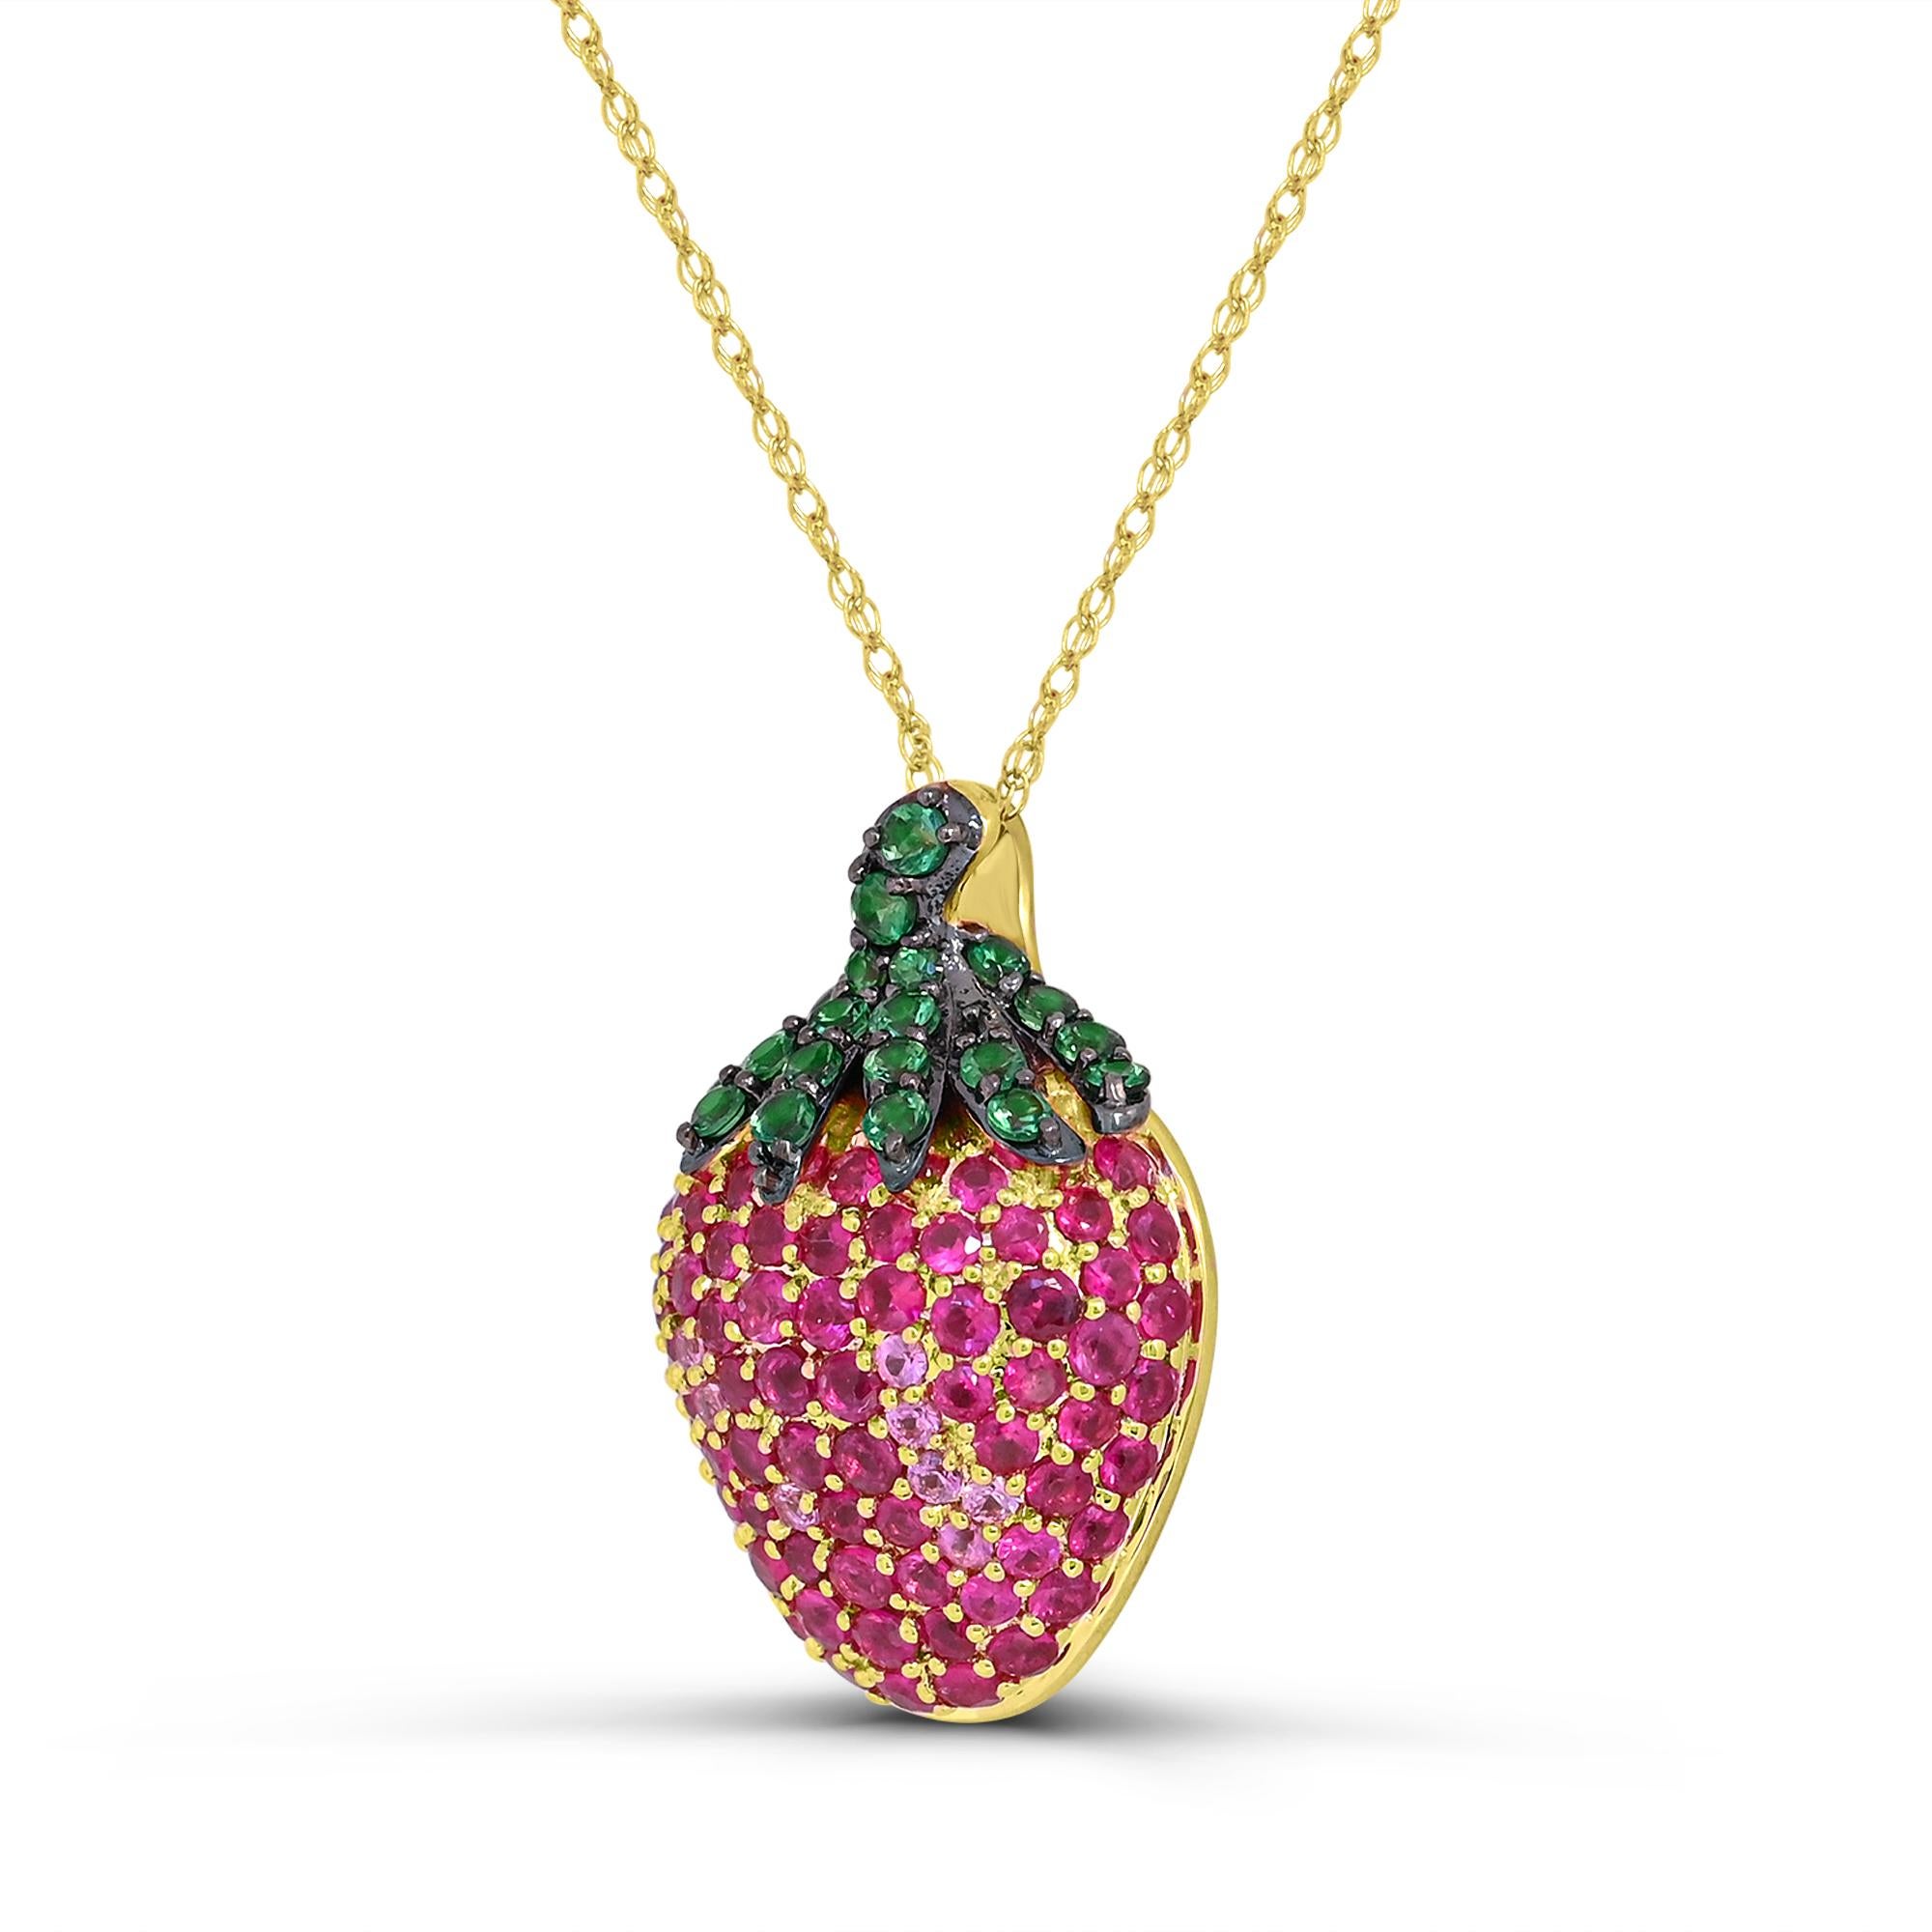 Indulge in the adorable design of our Ruby, Pink Sapphire and Tsavorite Strawberry Pendant Necklace in 14K Yellow Gold. Crafted with meticulous attention to detail, this necklace boasts a stunning combination of round rubies, sparkling round pink